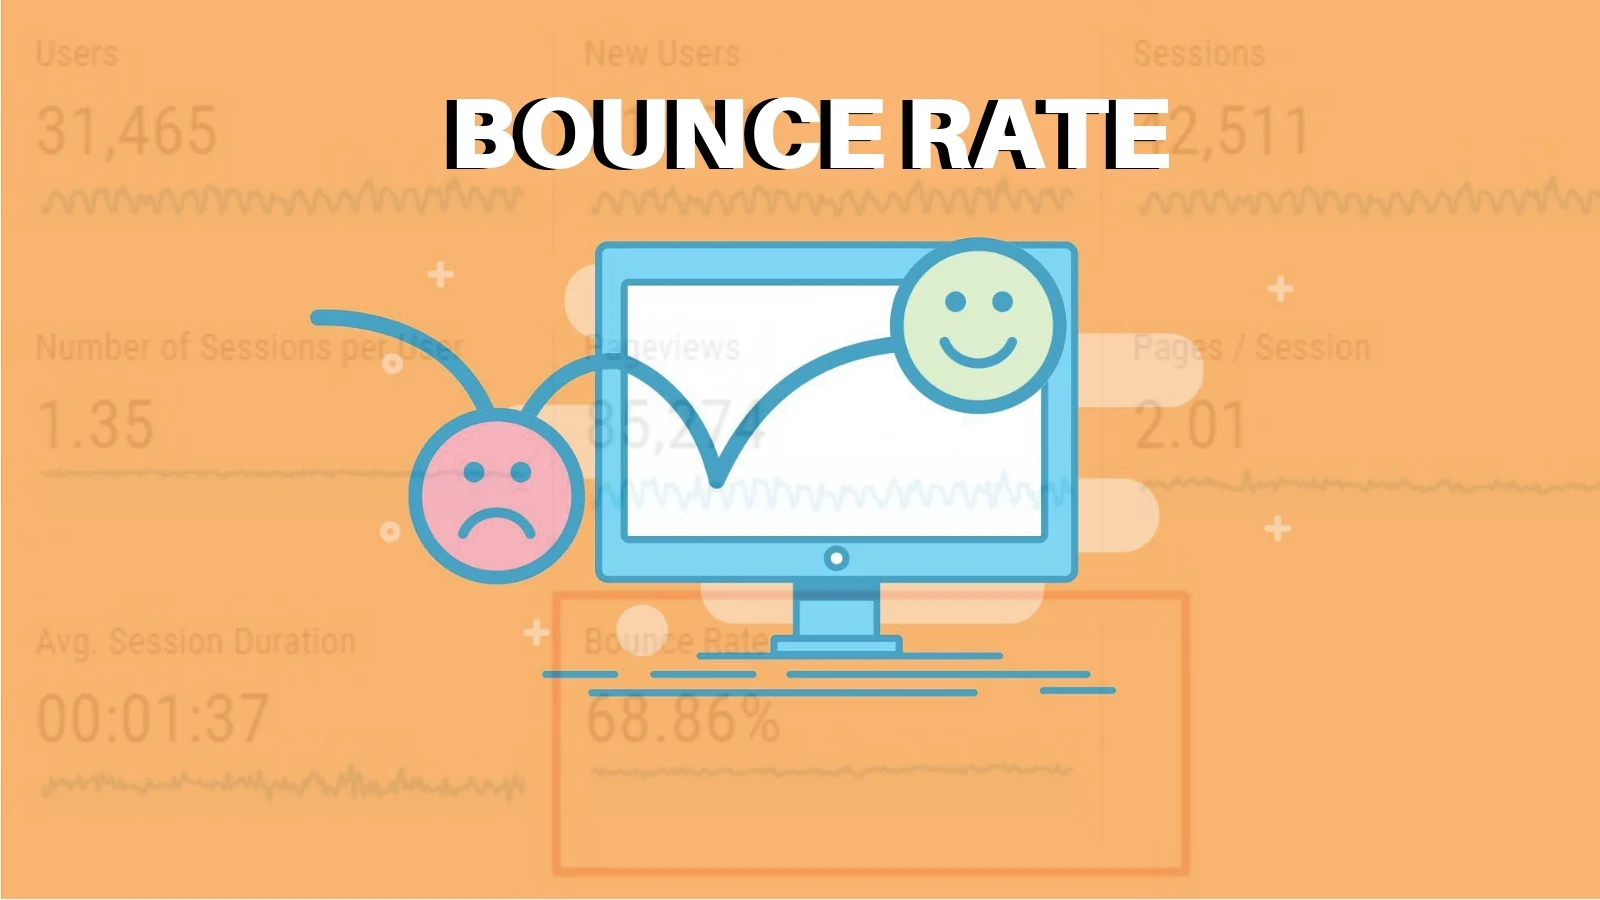 Know the Bounce Rate and How to Overcome It